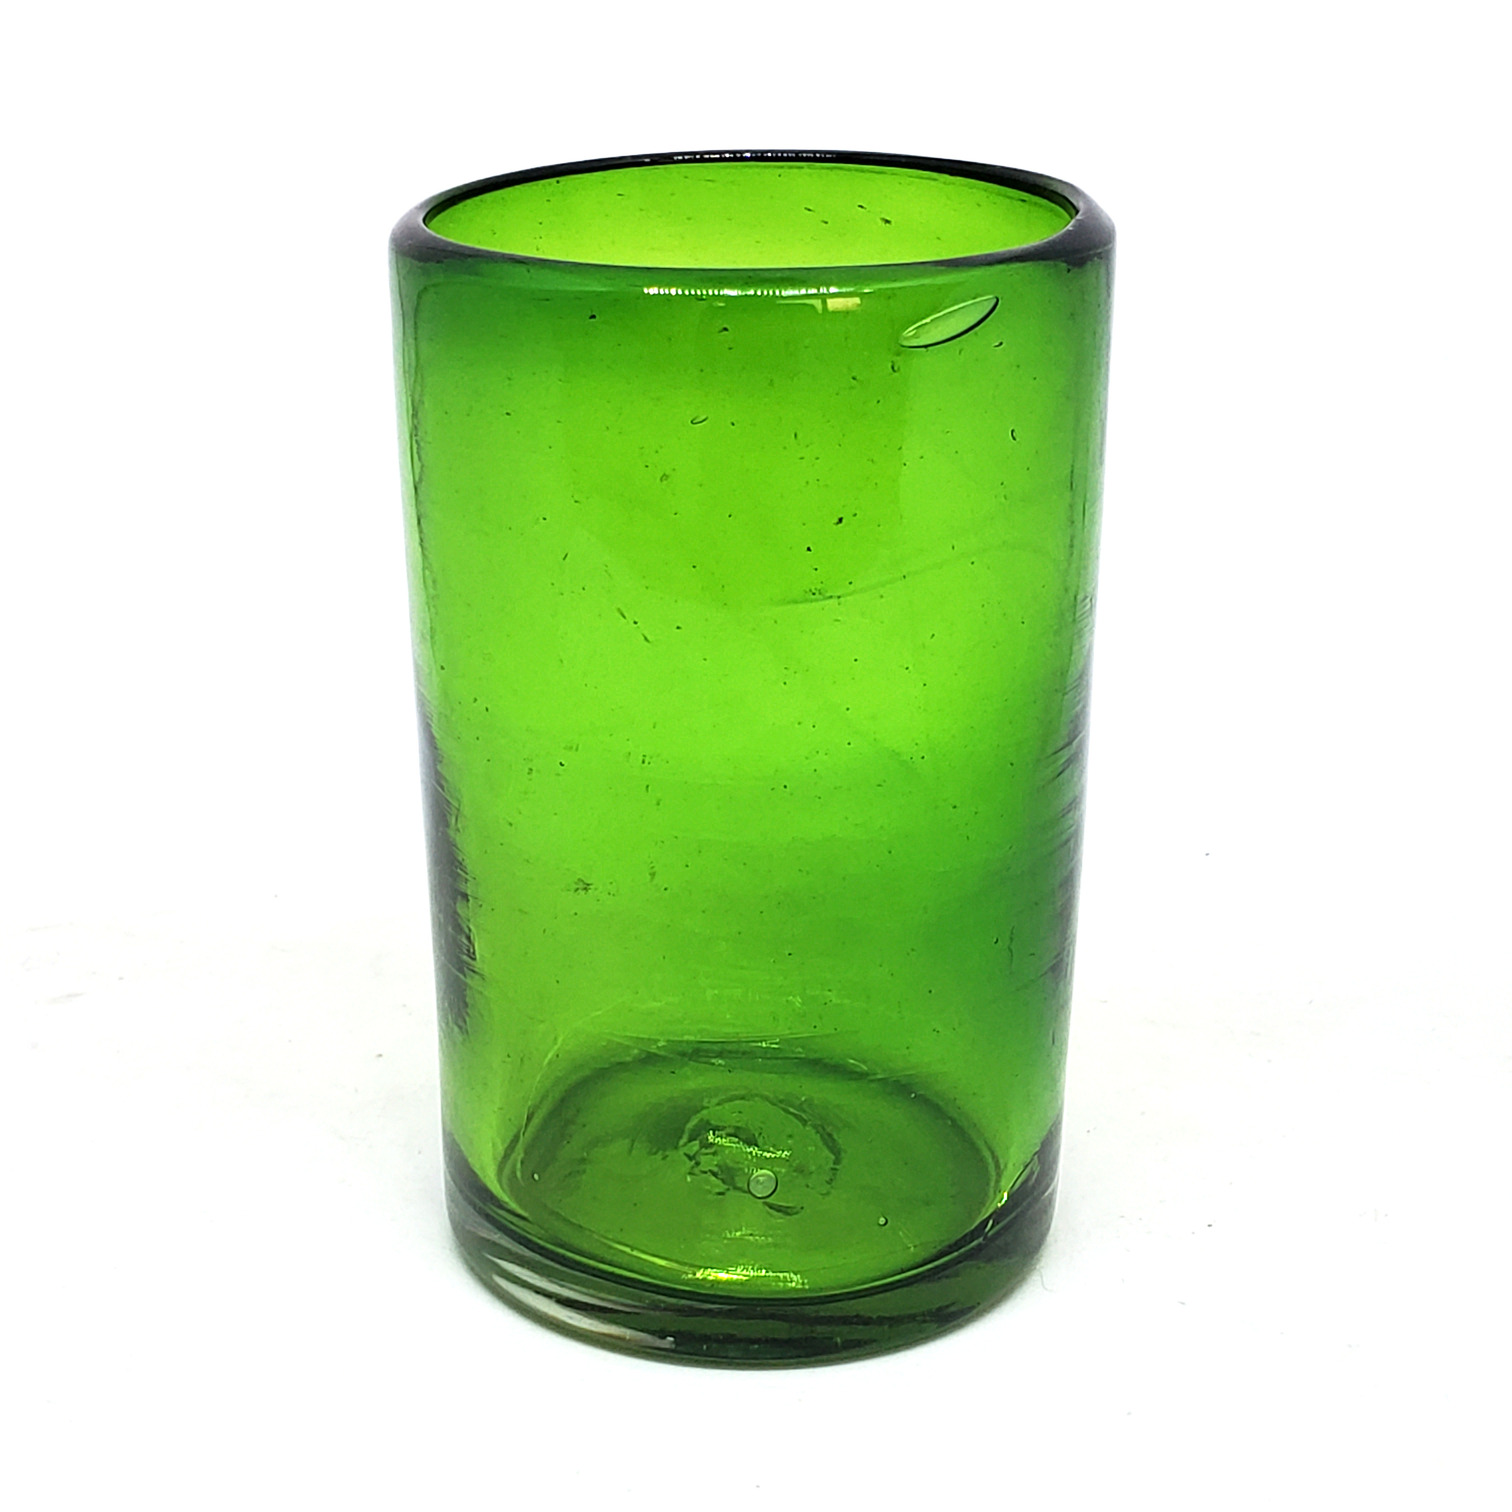 MEXICAN GLASSWARE / Solid Emerald Green 14 oz Drinking Glasses (set of 6)